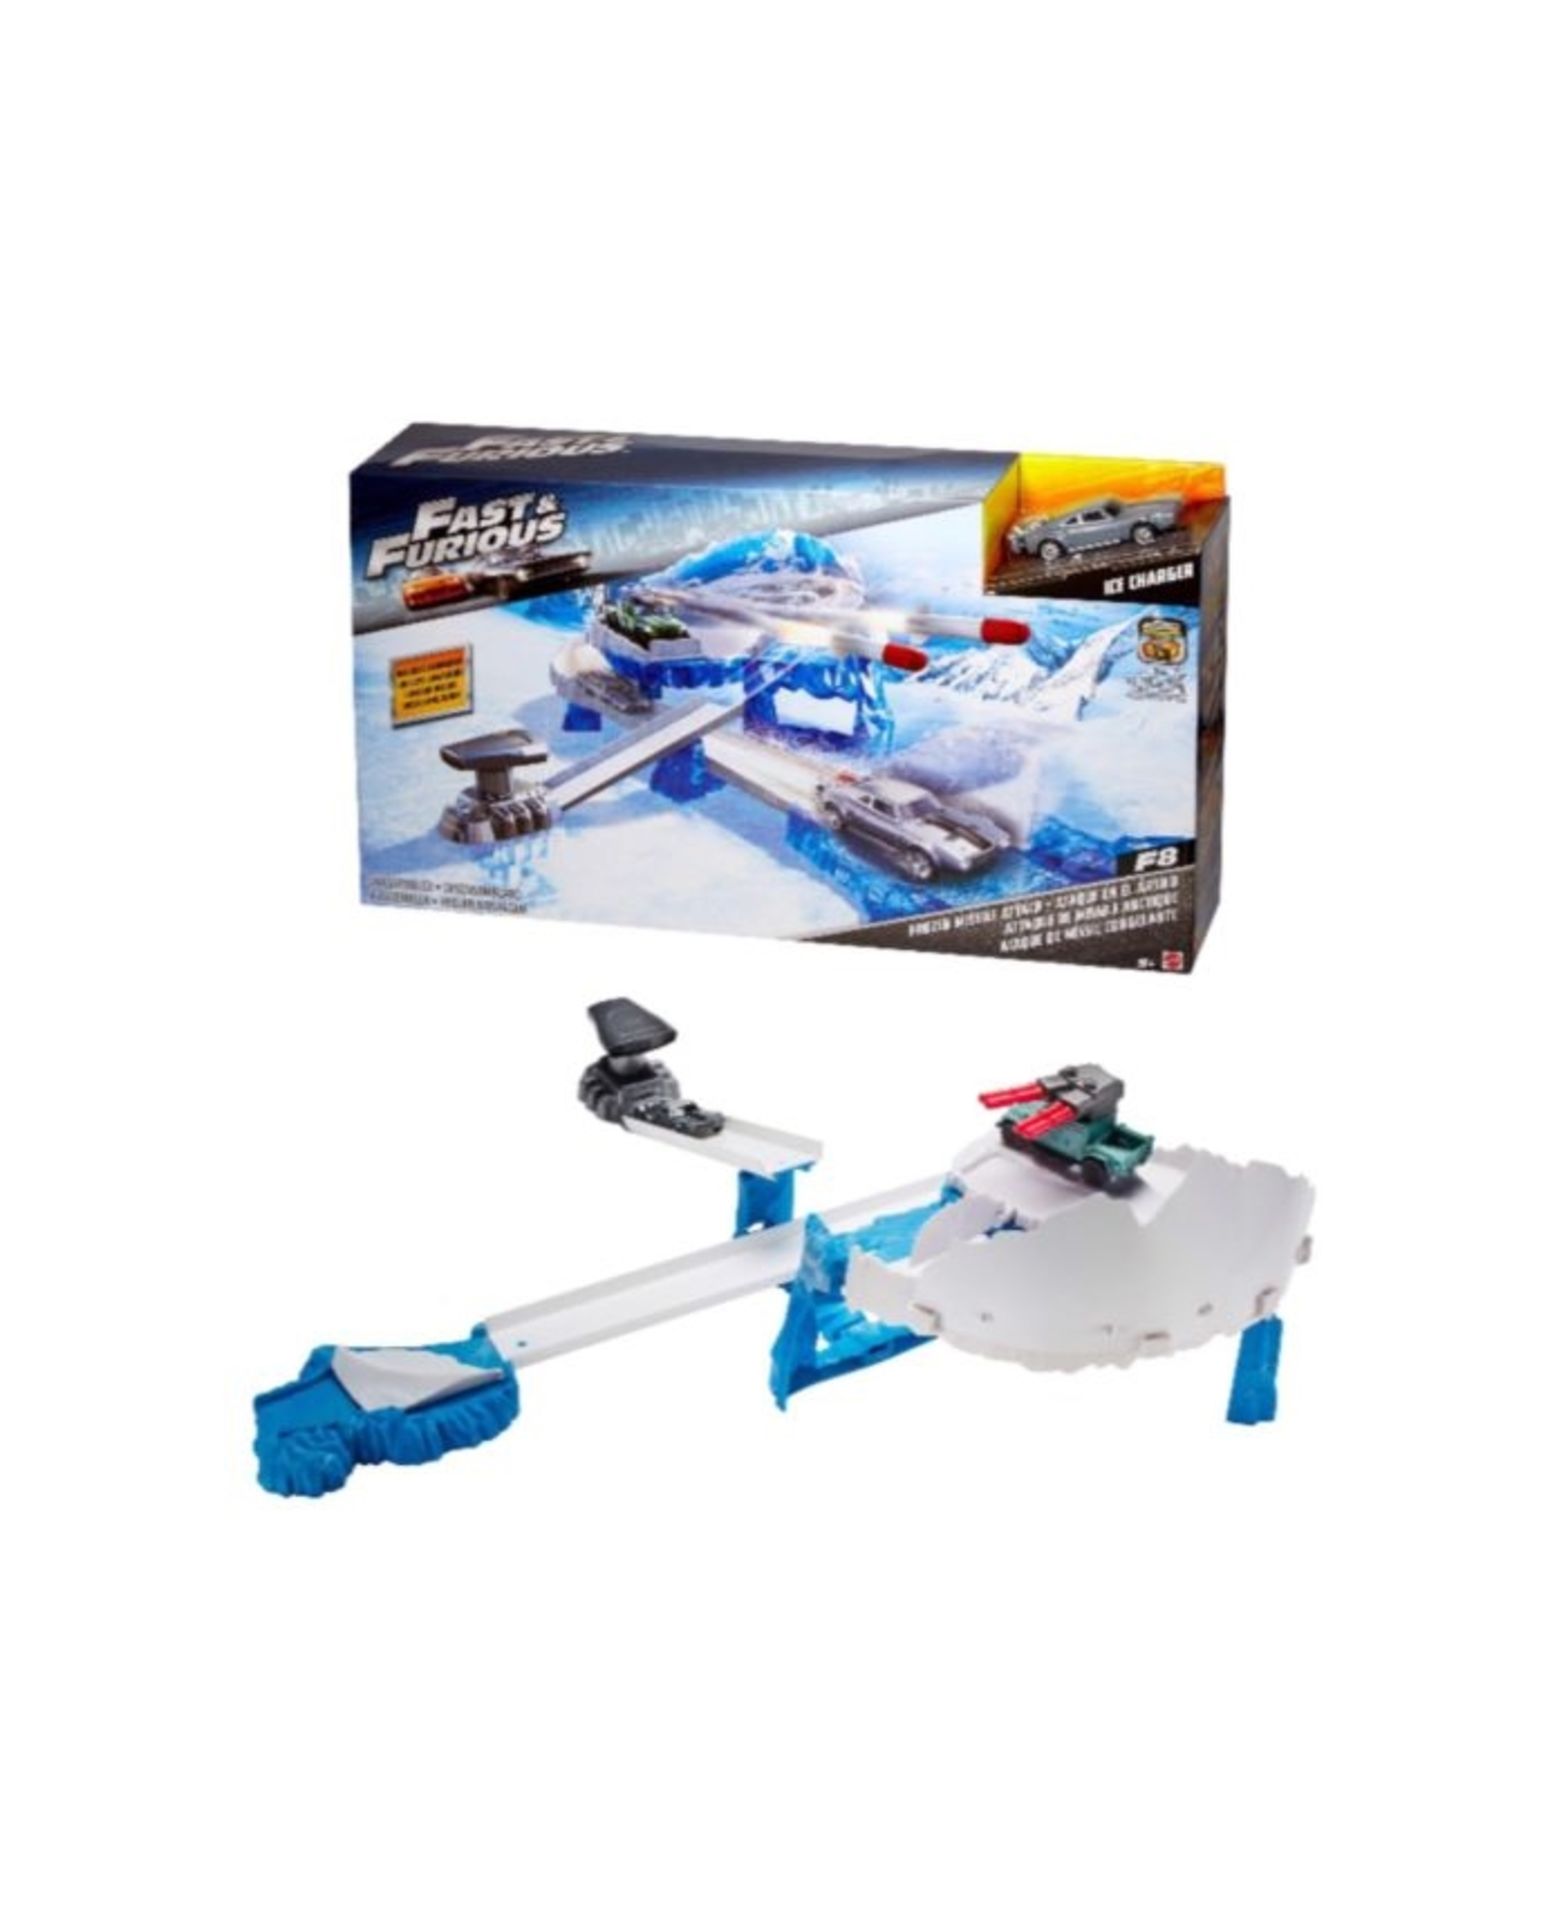 V Brand New Fast and Furious Frozen Missile Attack - Car Styles May Vary - Online Price £28.33 - Image 2 of 2